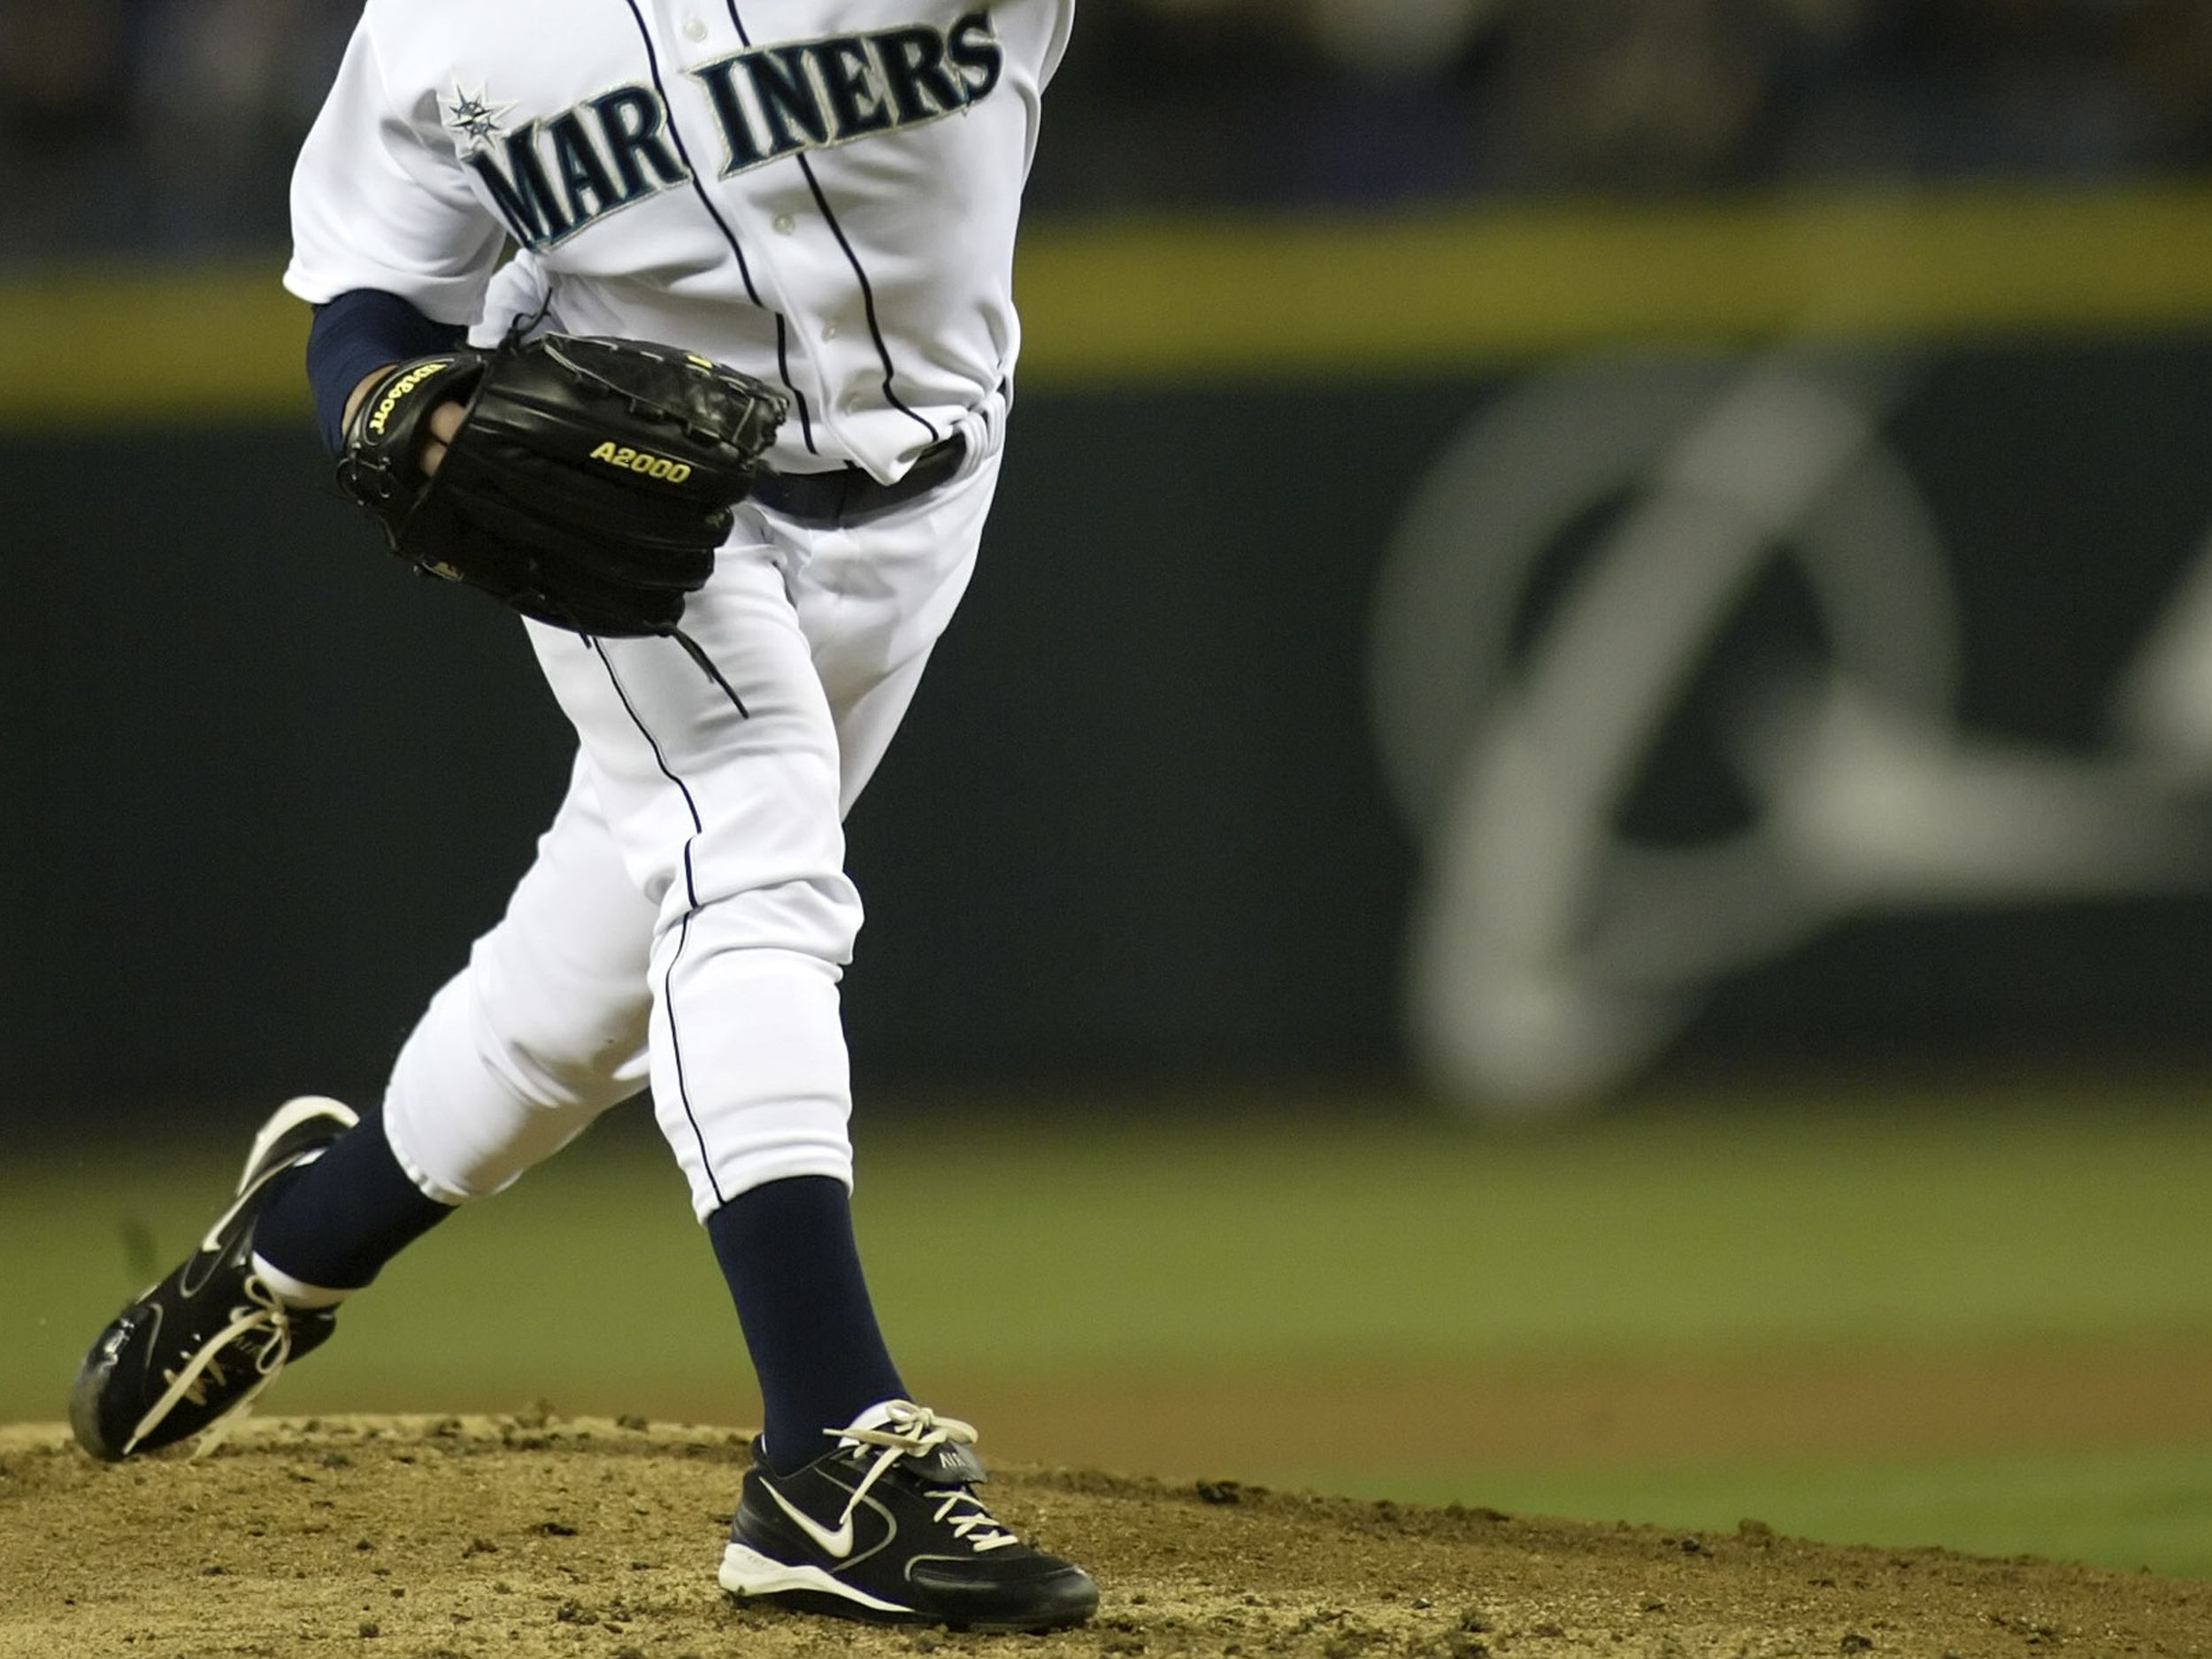 Jamie Moyer - Mariners Hall of Fame